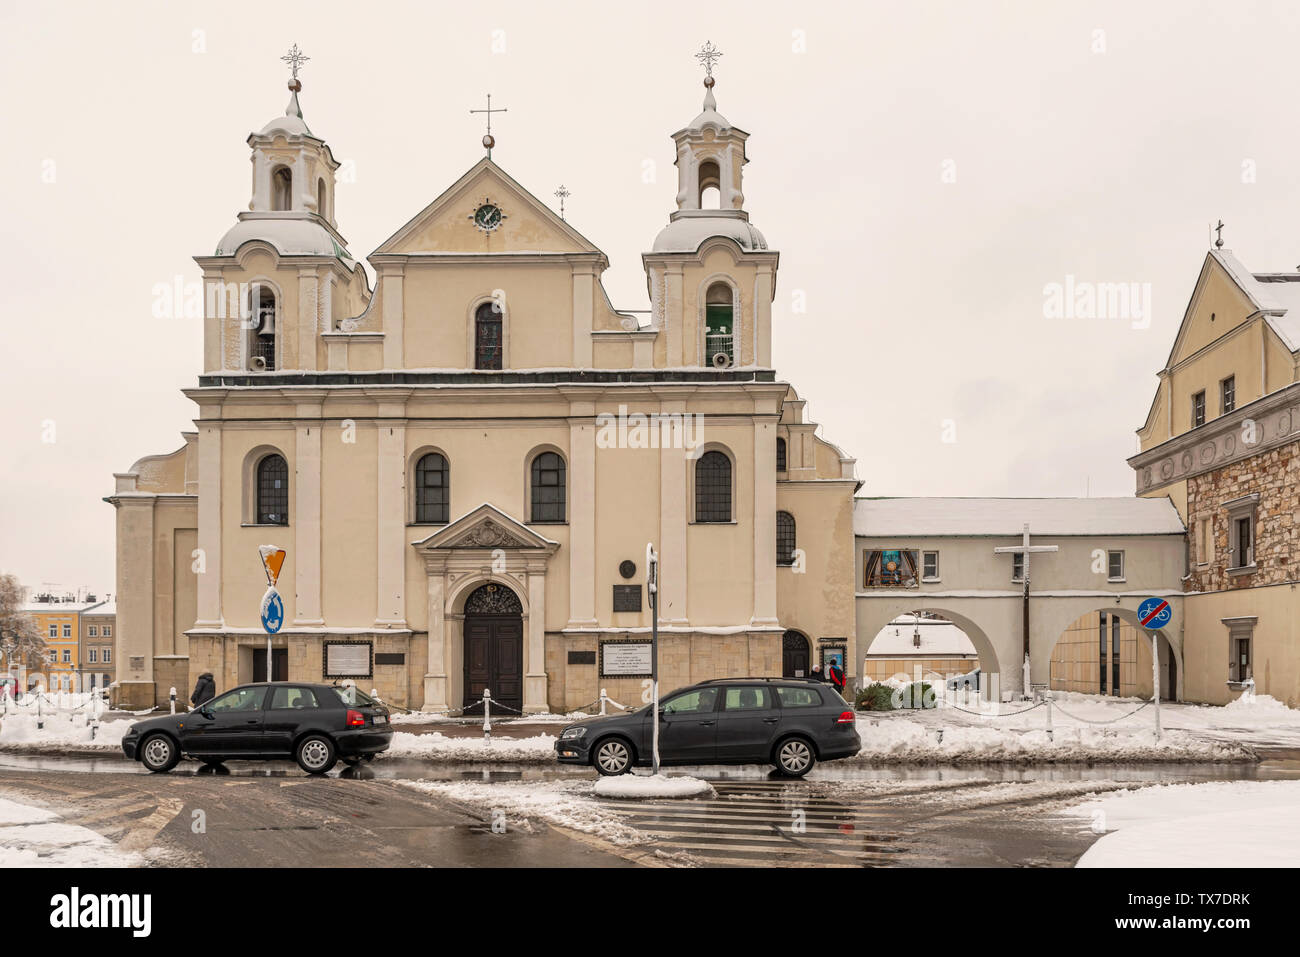 Czestochowa, Poland – Feb 4, 2019: View at the complex of the parish church of St Sigismund and a former Pauline monastery in Czestochowa, Poland. Stock Photo